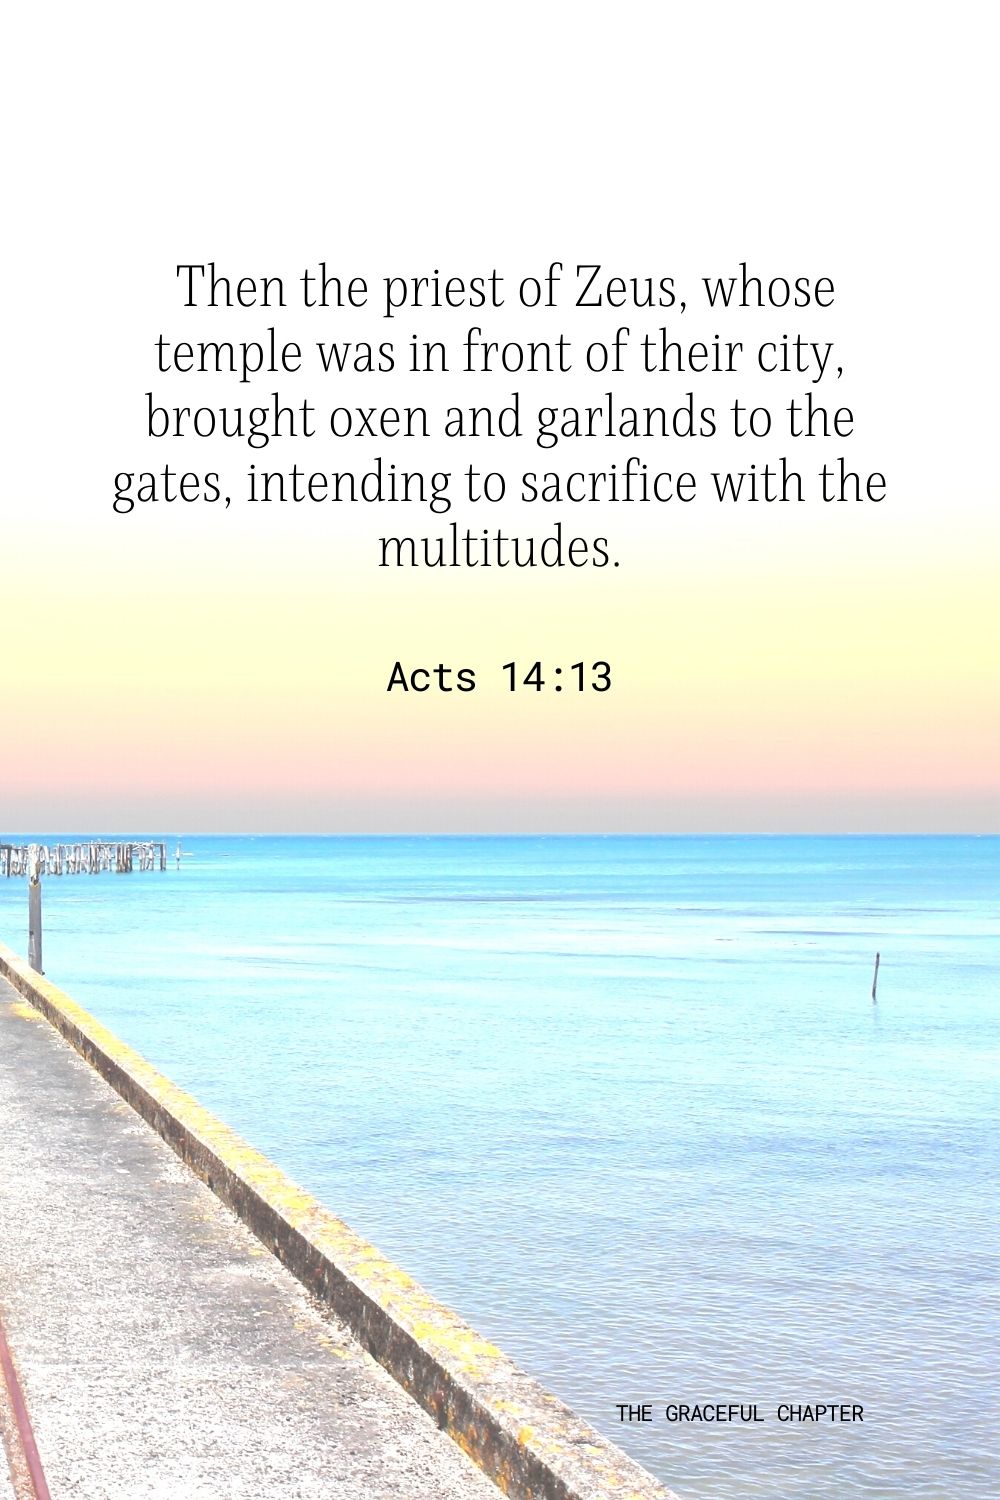  Then the priest of Zeus, whose temple was in front of their city, brought oxen and garlands to the gates, intending to sacrifice with the multitudes. Acts 14:13